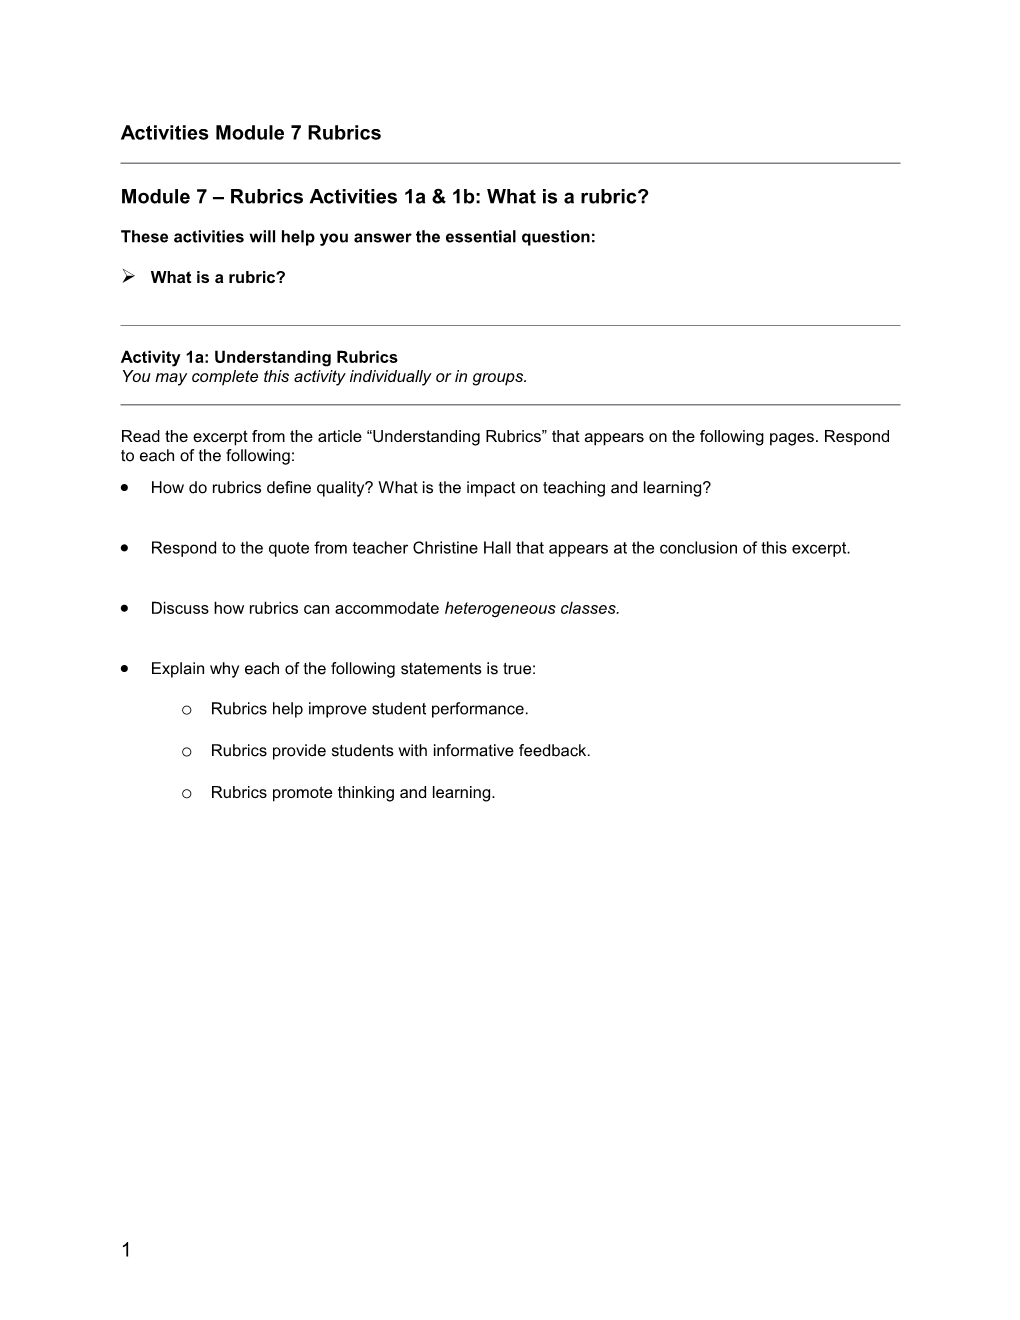 Module 7 Rubrics Activities 1A & 1B: What Is a Rubric?